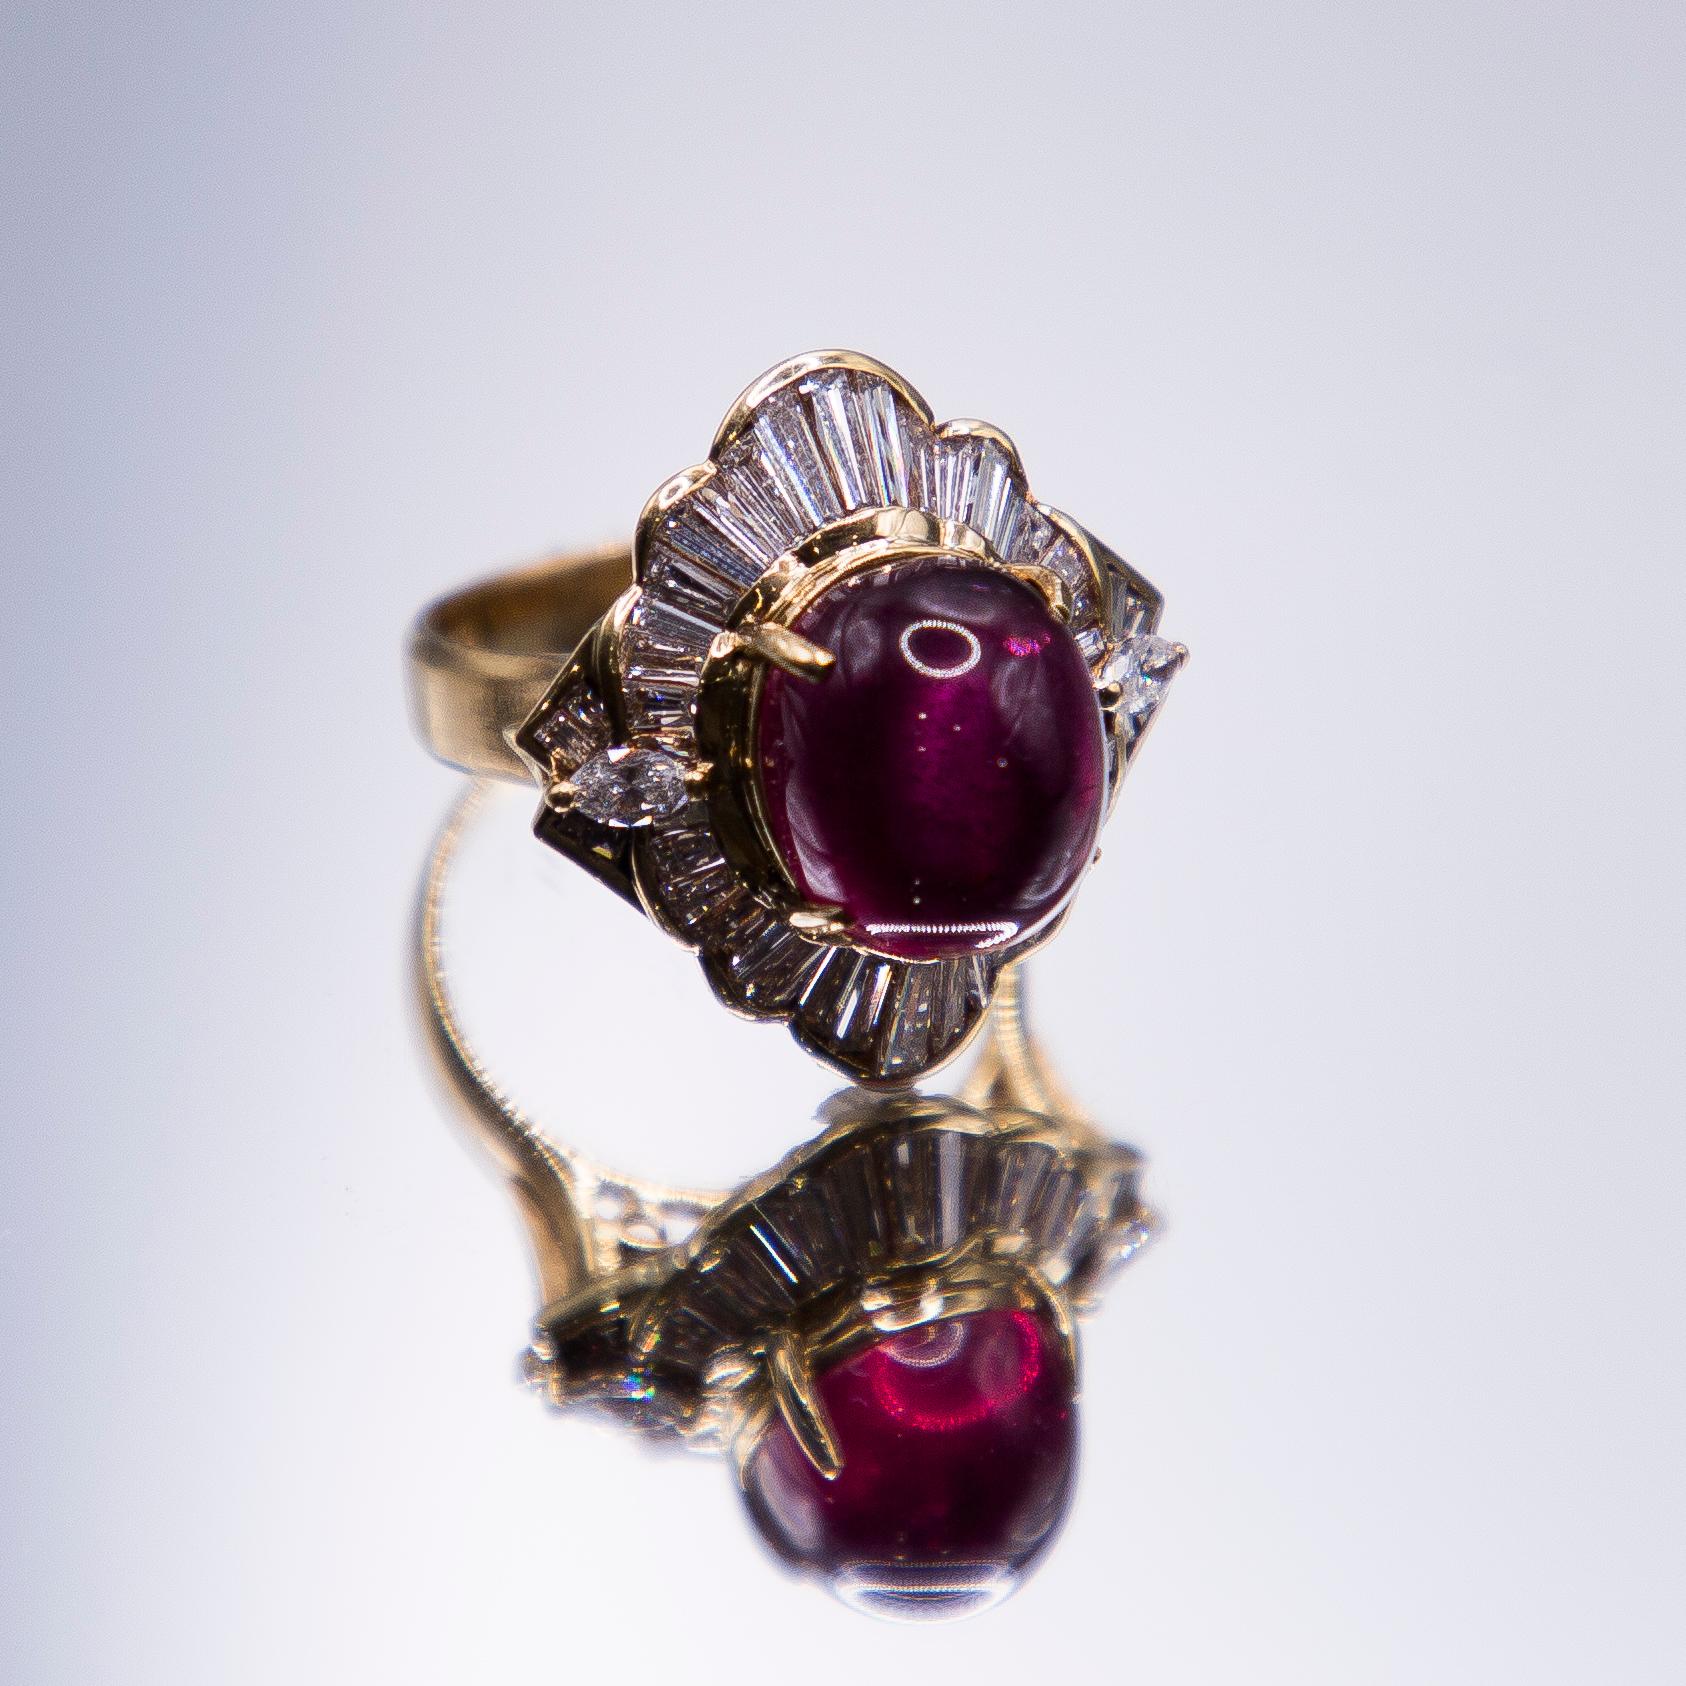 Cabochon 10.02 Carat Rubellite /18k Yellow Gold 2.31 Carats Fine Diamonds Cocktail Ring For Sale